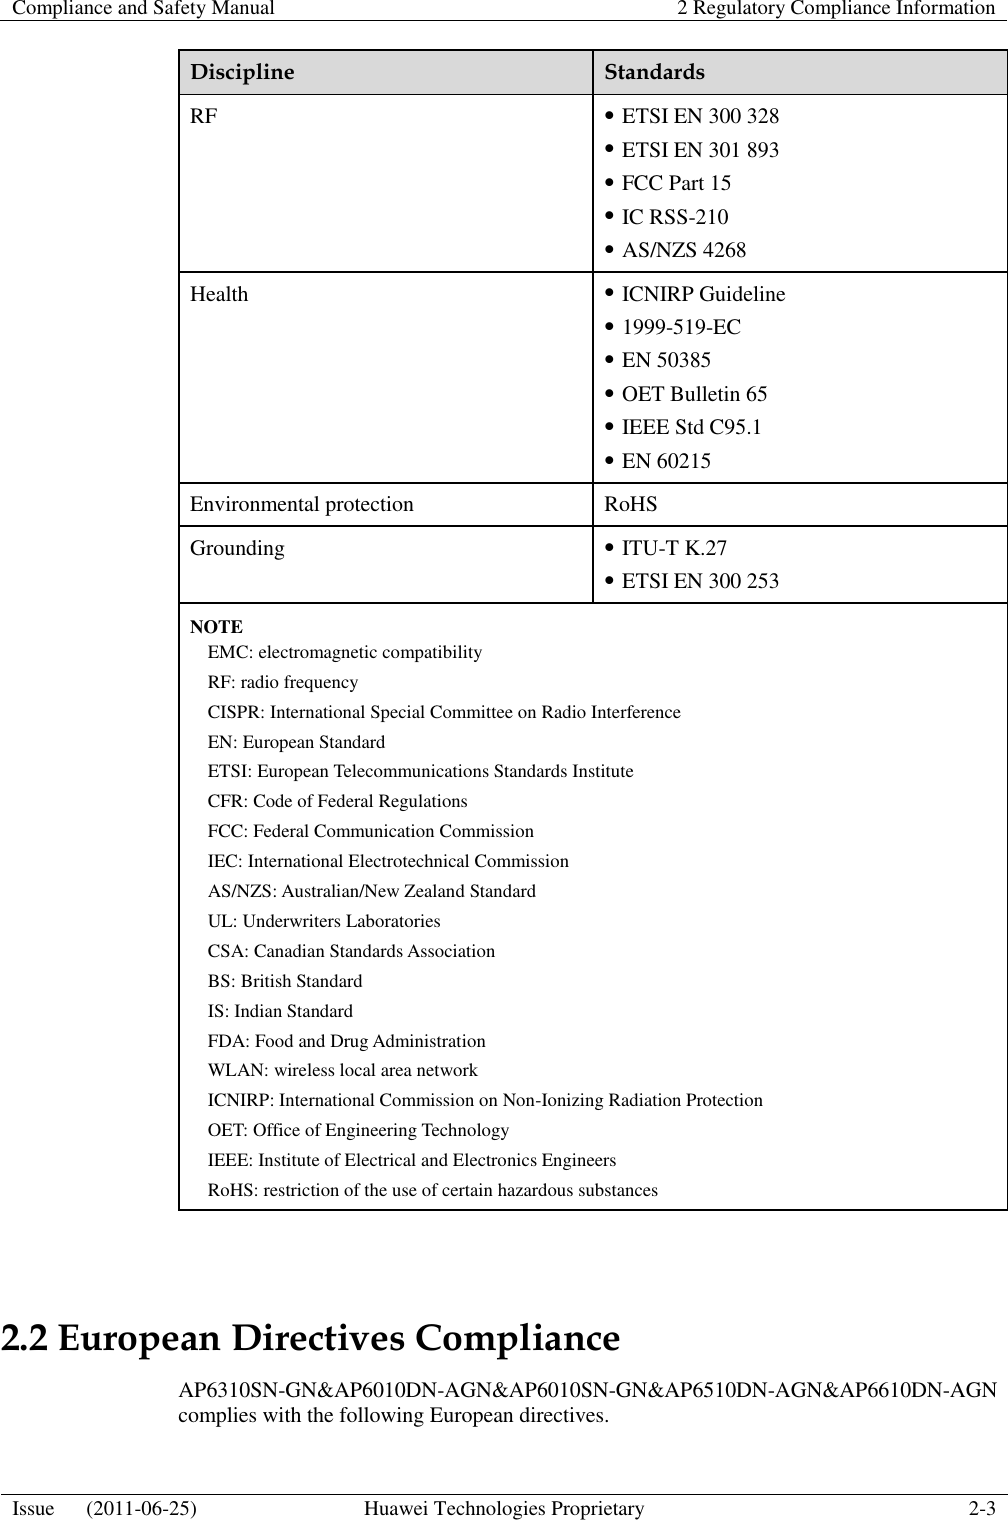 Compliance and Safety Manual 2 Regulatory Compliance Information  Issue      (2011-06-25) Huawei Technologies Proprietary 2-3  Discipline Standards RF  ETSI EN 300 328    ETSI EN 301 893    FCC Part 15  IC RSS-210  AS/NZS 4268 Health  ICNIRP Guideline  1999-519-EC  EN 50385  OET Bulletin 65  IEEE Std C95.1  EN 60215 Environmental protection RoHS Grounding  ITU-T K.27  ETSI EN 300 253 NOTE EMC: electromagnetic compatibility RF: radio frequency CISPR: International Special Committee on Radio Interference EN: European Standard ETSI: European Telecommunications Standards Institute CFR: Code of Federal Regulations FCC: Federal Communication Commission IEC: International Electrotechnical Commission AS/NZS: Australian/New Zealand Standard UL: Underwriters Laboratories CSA: Canadian Standards Association BS: British Standard IS: Indian Standard FDA: Food and Drug Administration WLAN: wireless local area network ICNIRP: International Commission on Non-Ionizing Radiation Protection OET: Office of Engineering Technology IEEE: Institute of Electrical and Electronics Engineers RoHS: restriction of the use of certain hazardous substances  2.2 European Directives Compliance AP6310SN-GN&amp;AP6010DN-AGN&amp;AP6010SN-GN&amp;AP6510DN-AGN&amp;AP6610DN-AGN complies with the following European directives. 